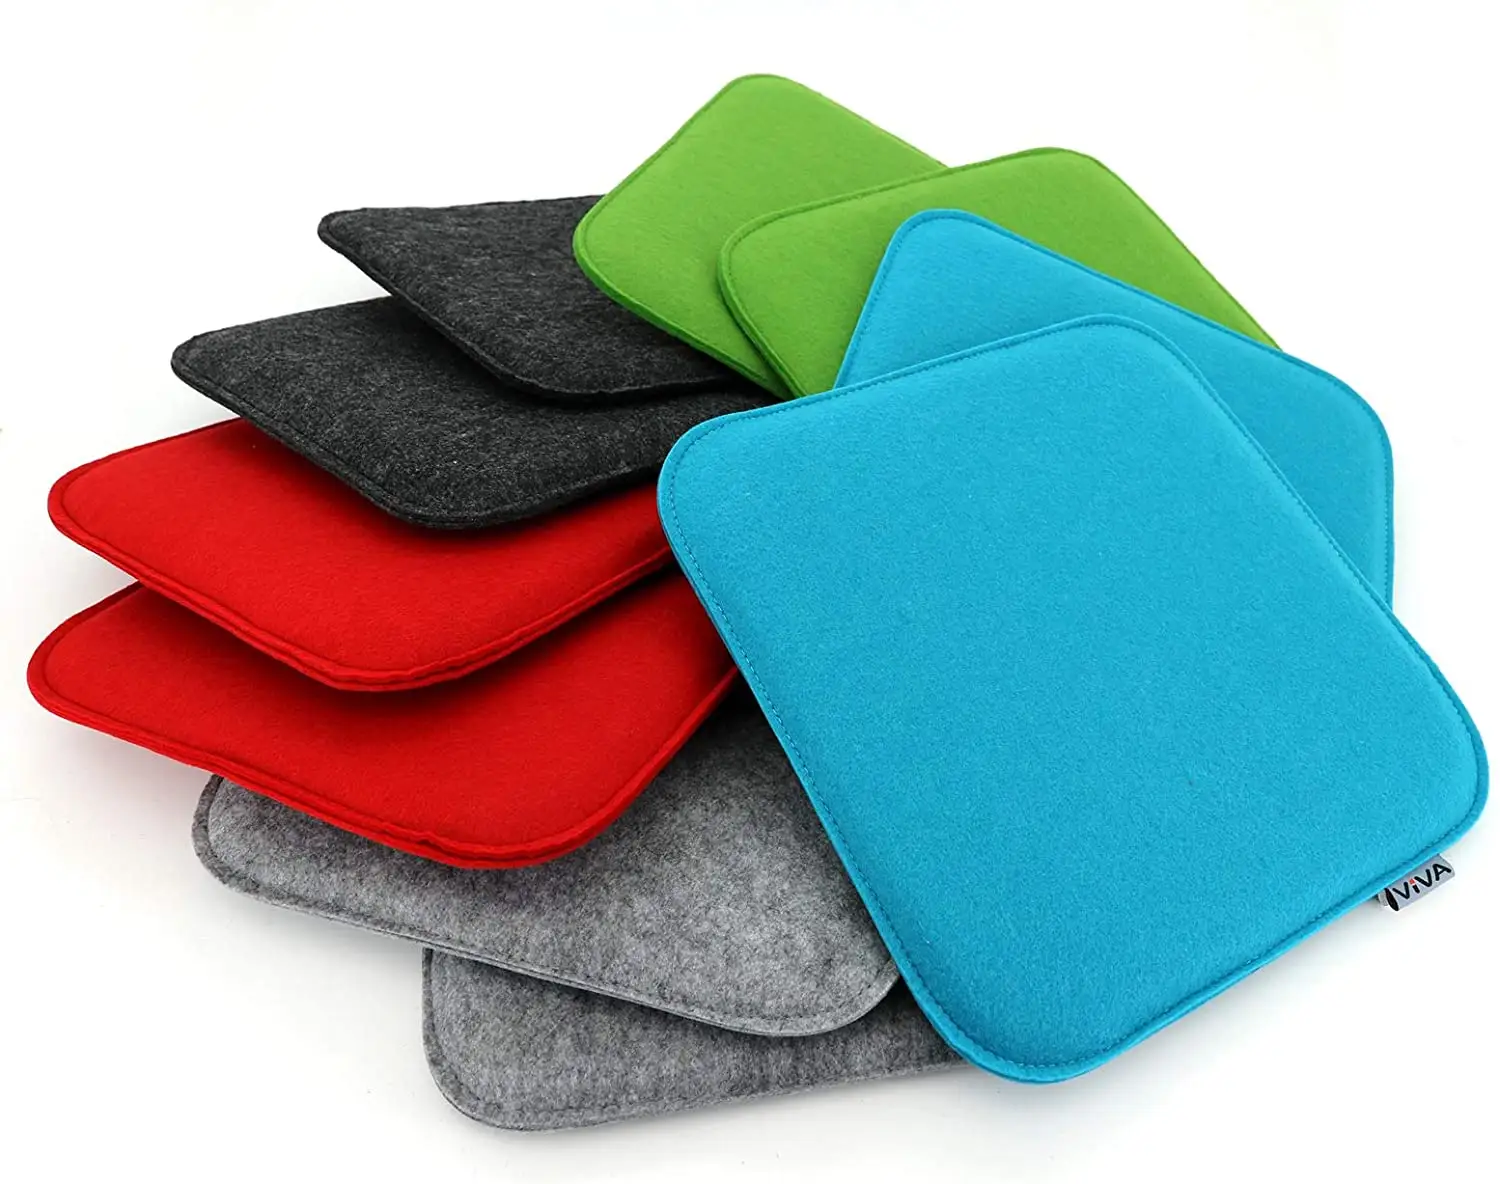 colorful chair pad upholstery cushion heated seat cushions felt 35x35 cm anthracite felt cushions for home office outdoor